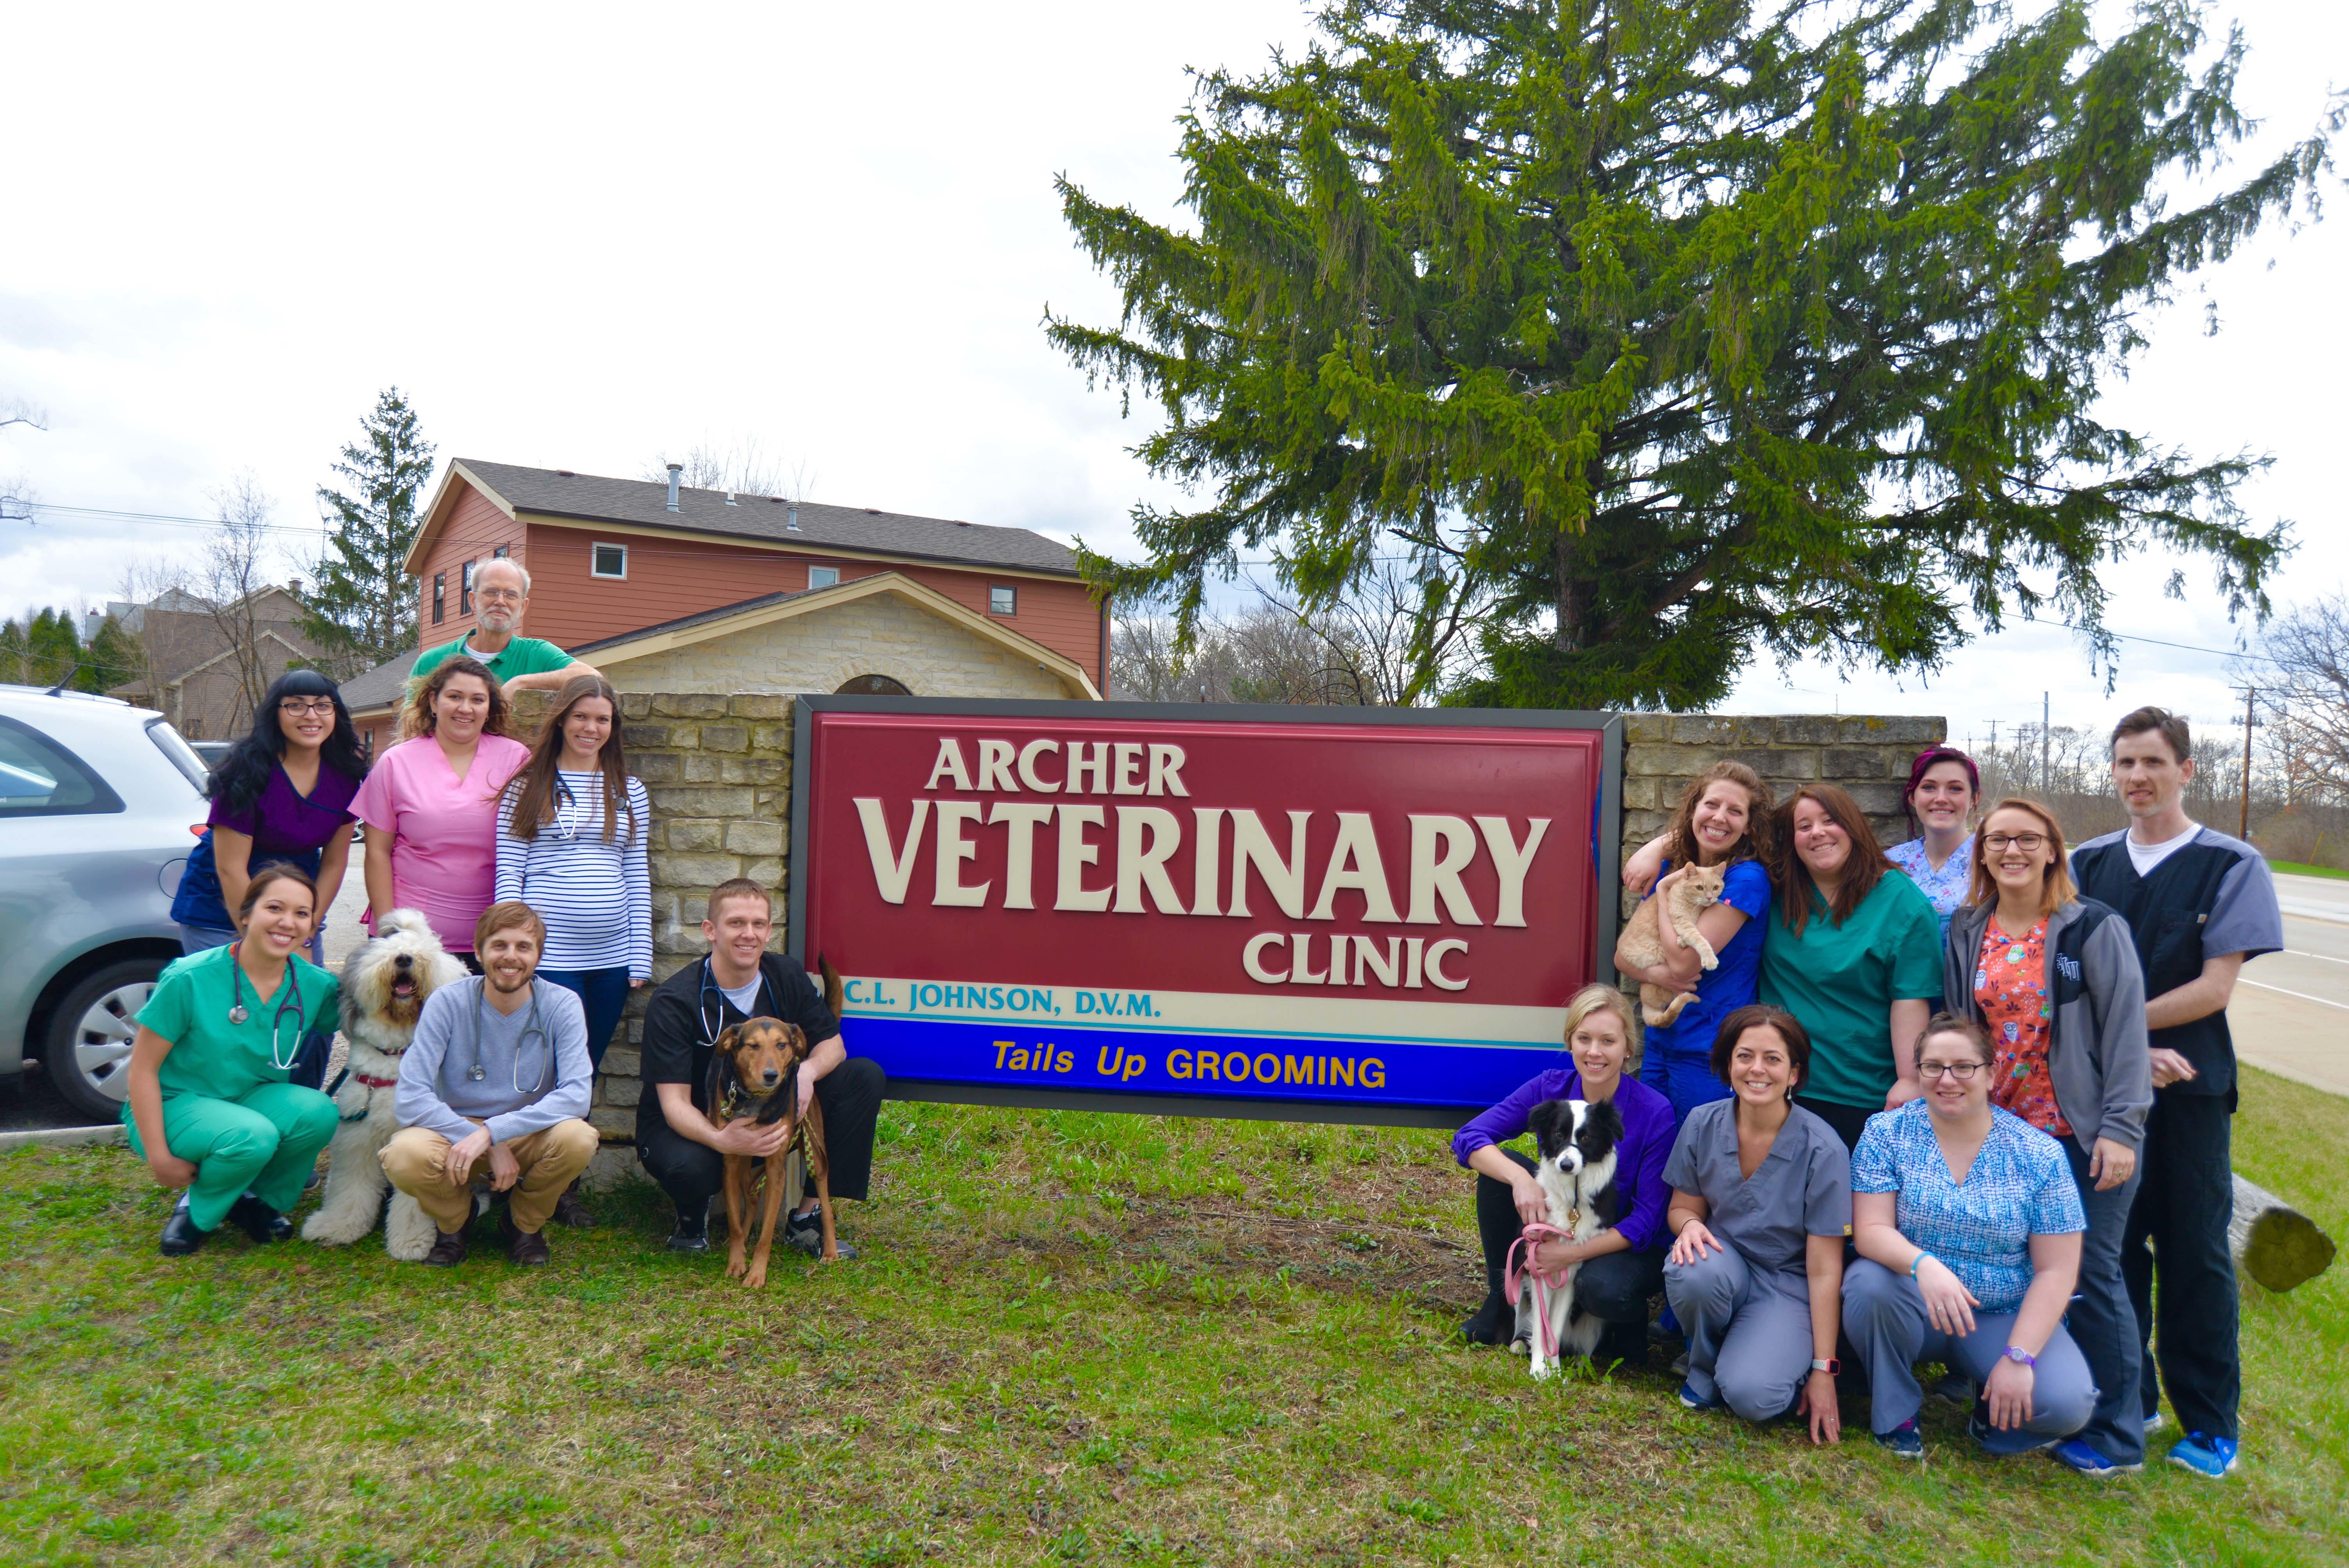 Drs. Johnson, Joe, Lenane, Seader, and Tibbets, and the rest of our hospital family, are dedicated t Archer Veterinary Clinic Lemont (630)257-5121